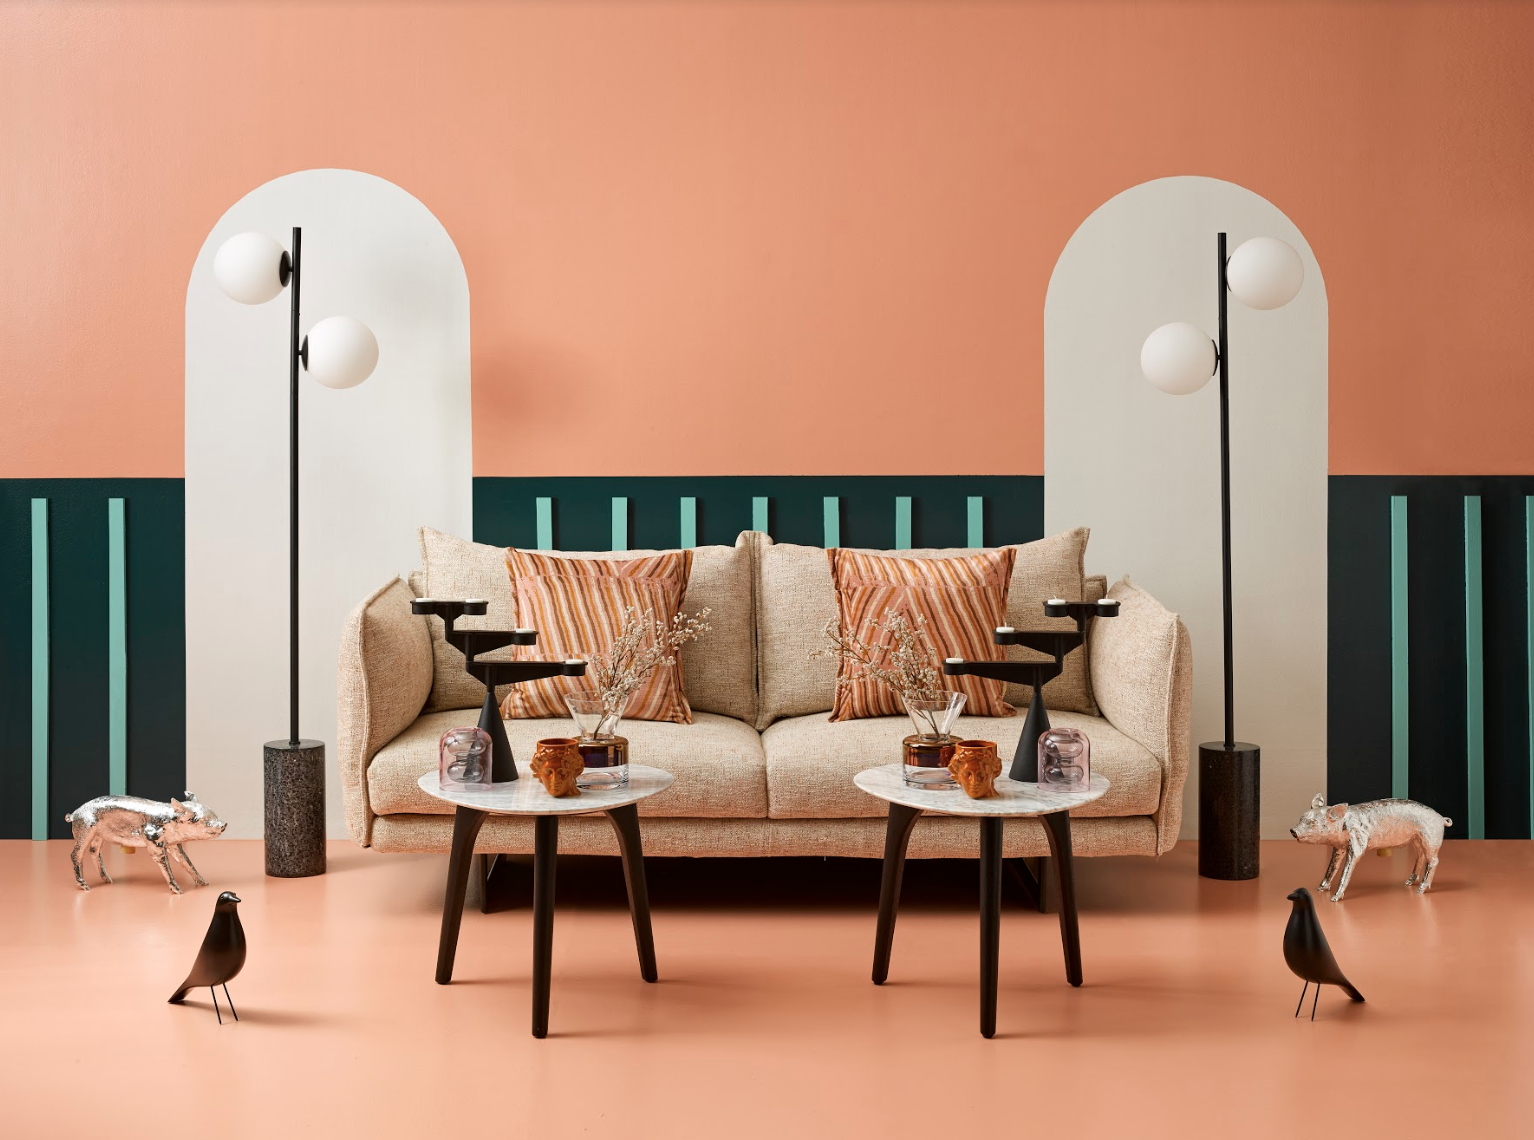 Seven tips for creating your own Wes Anderson inspired interior 